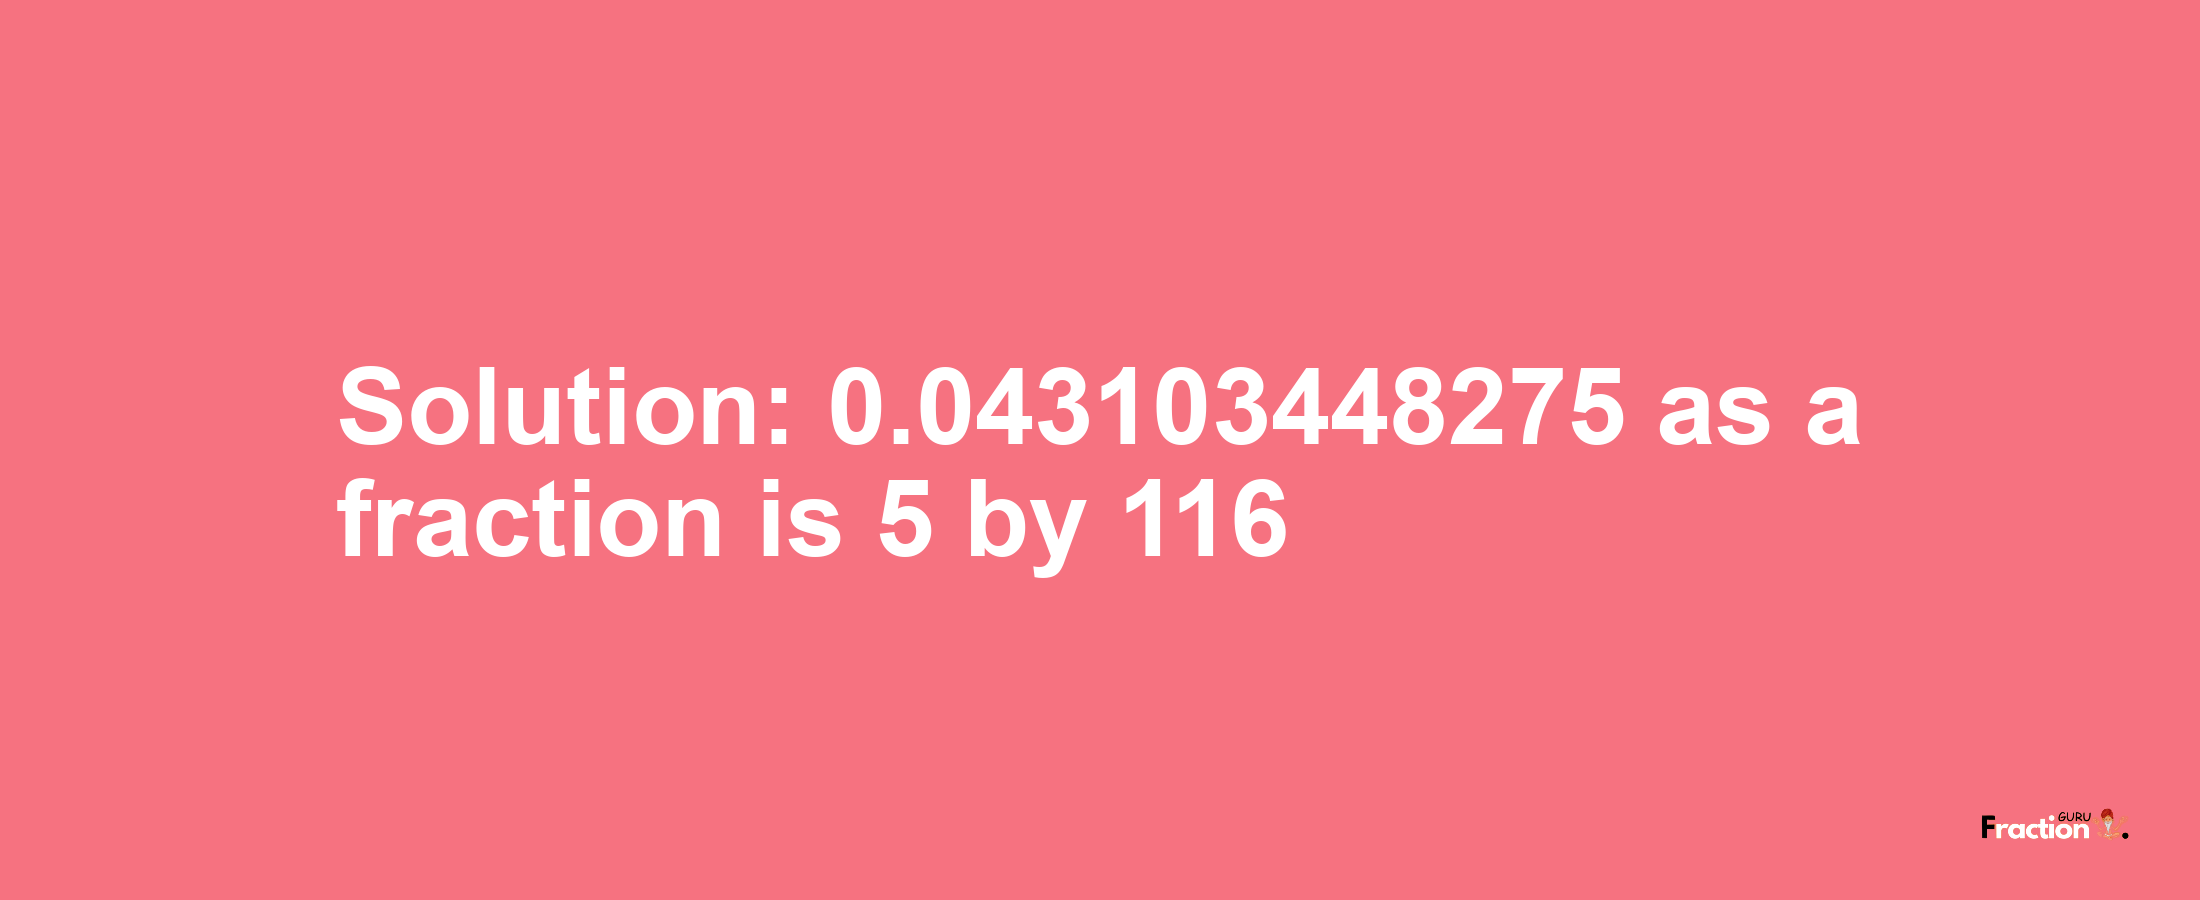 Solution:0.043103448275 as a fraction is 5/116